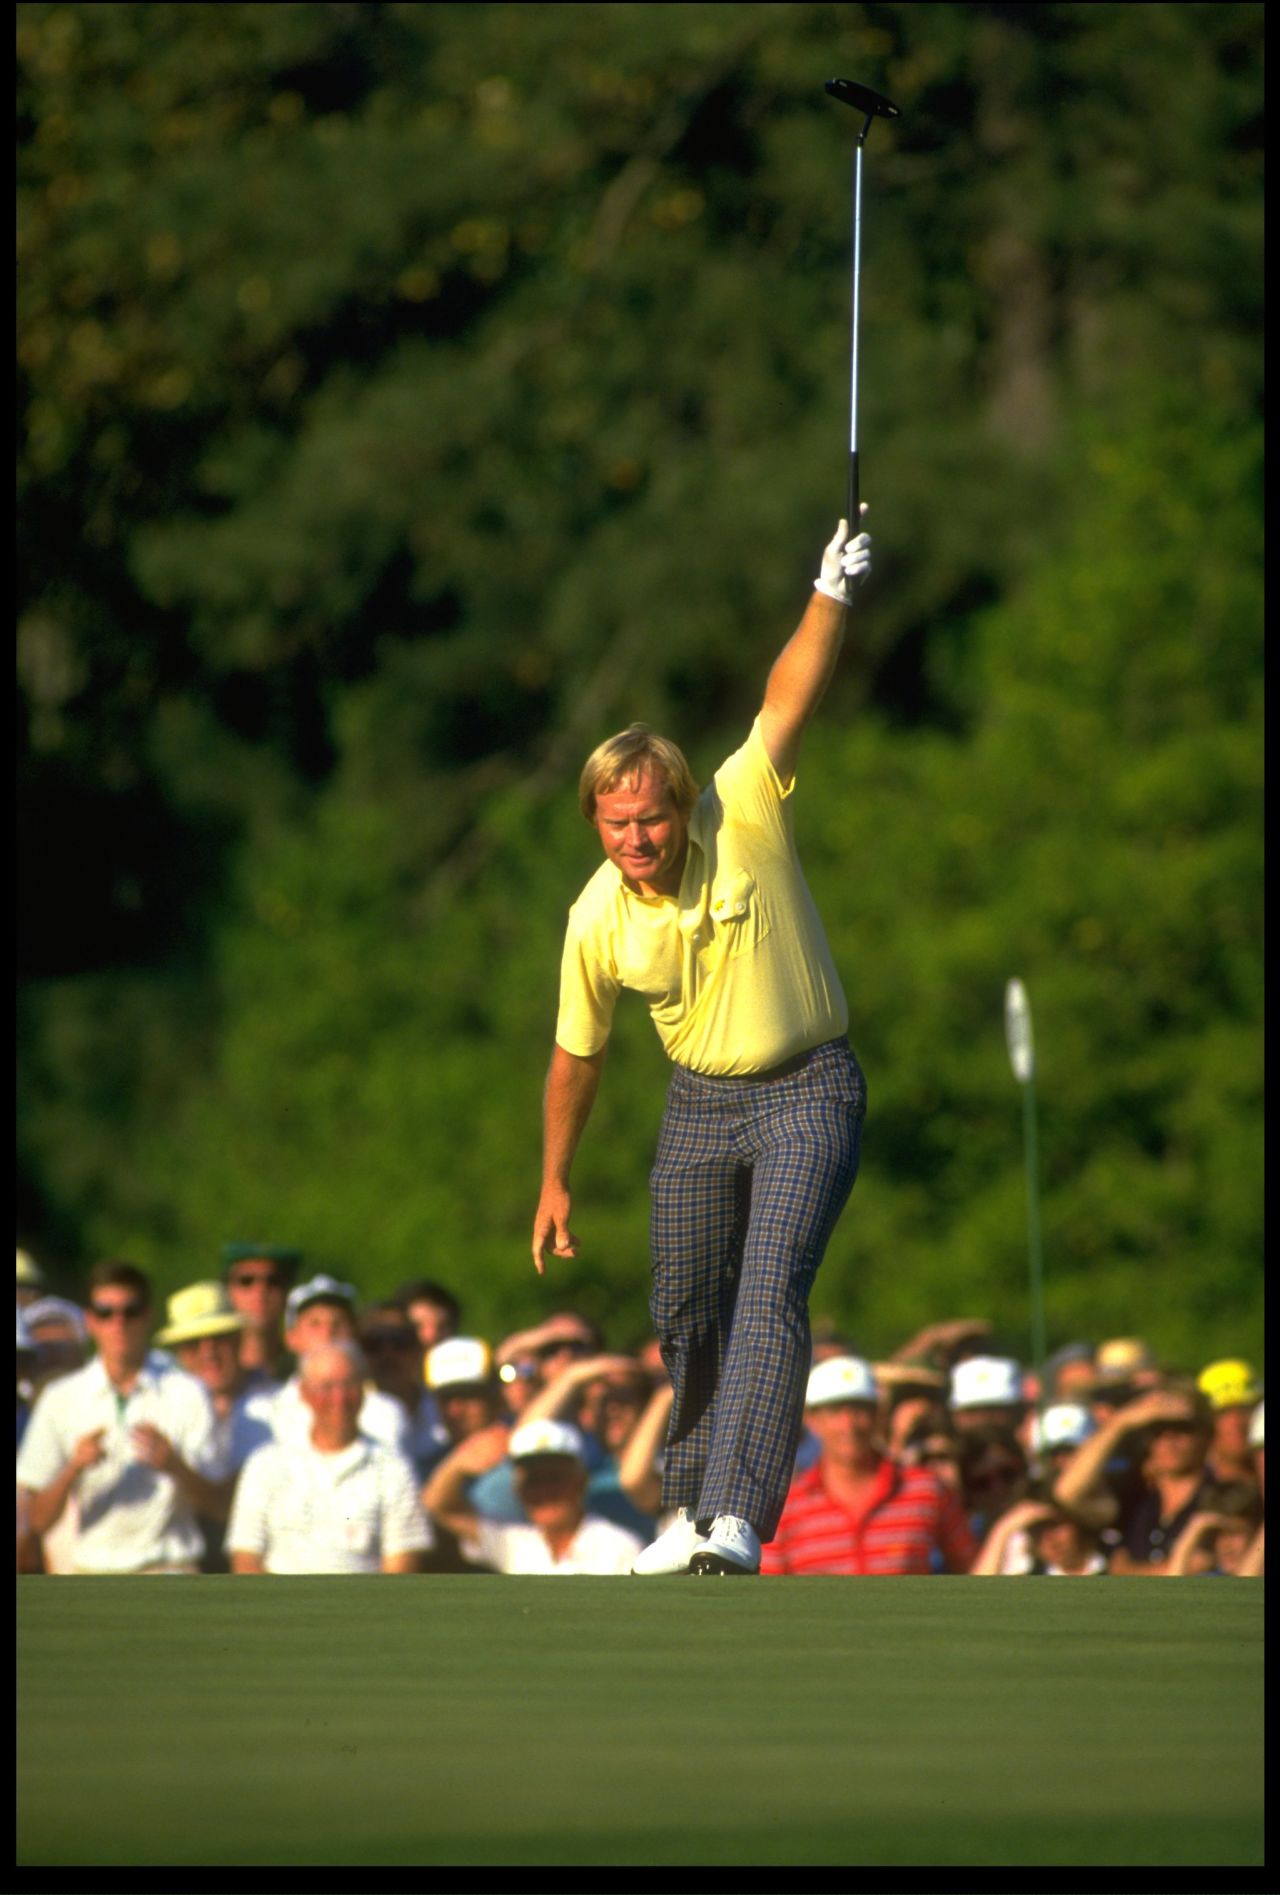 Nicklaus bagged two more majors at the age of 40, but by 1986, aged 46, he hadn't won one for six years. A newspaper article ahead of the Masters said he was "done, washed up, through." Trailing leader Greg Norman by four going into the final day, Nicklaus summoned some old magic. A famous birdie putt on the 17th gave him the lead for the first time.